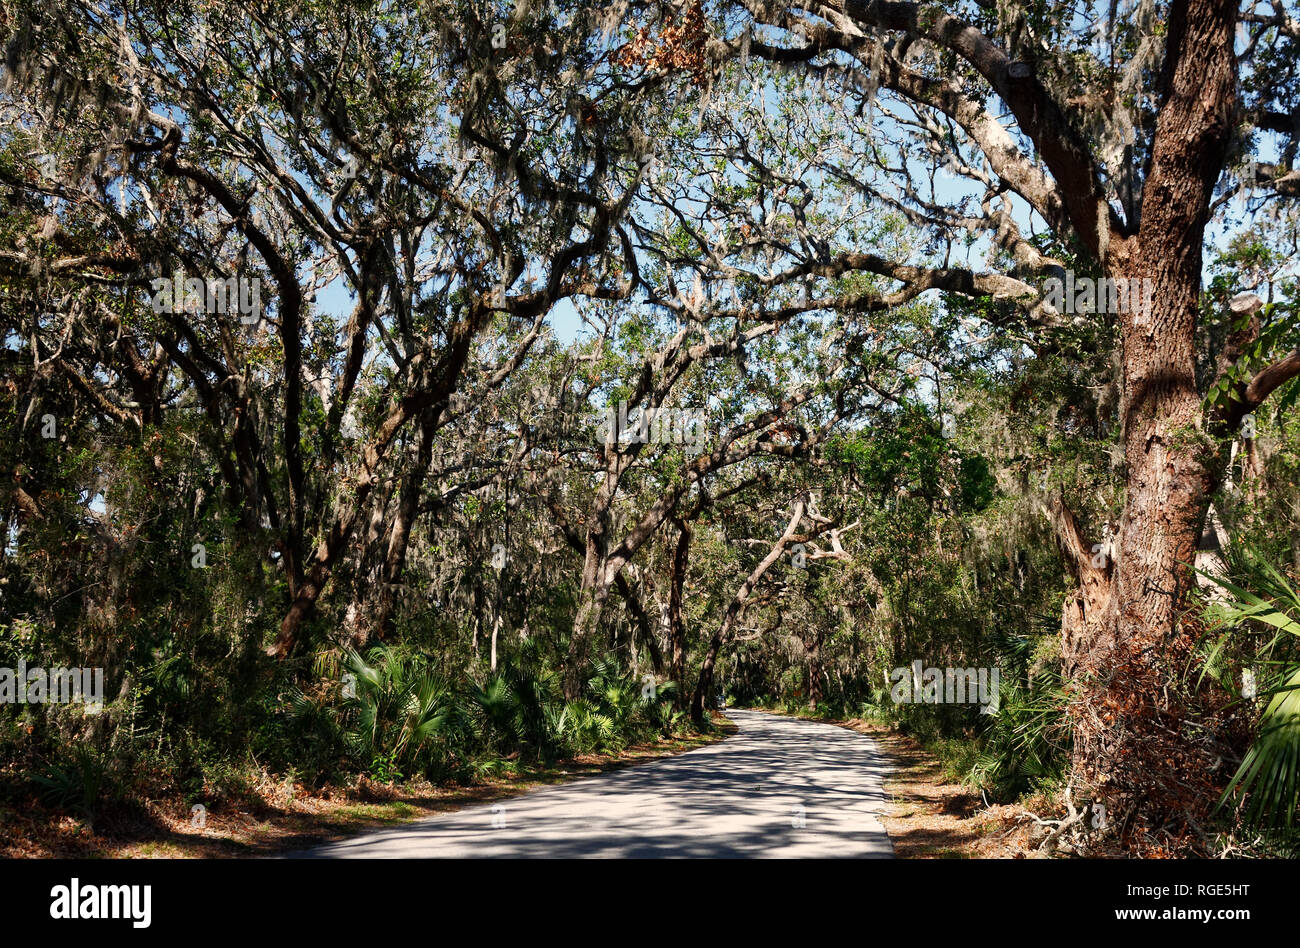 curved road, overhead tree canopy, Spanish moss, filtered sunlight, peaceful, Fort Clinch State Park, Fernandina Beach; FL, autumn; horizontal Stock Photo